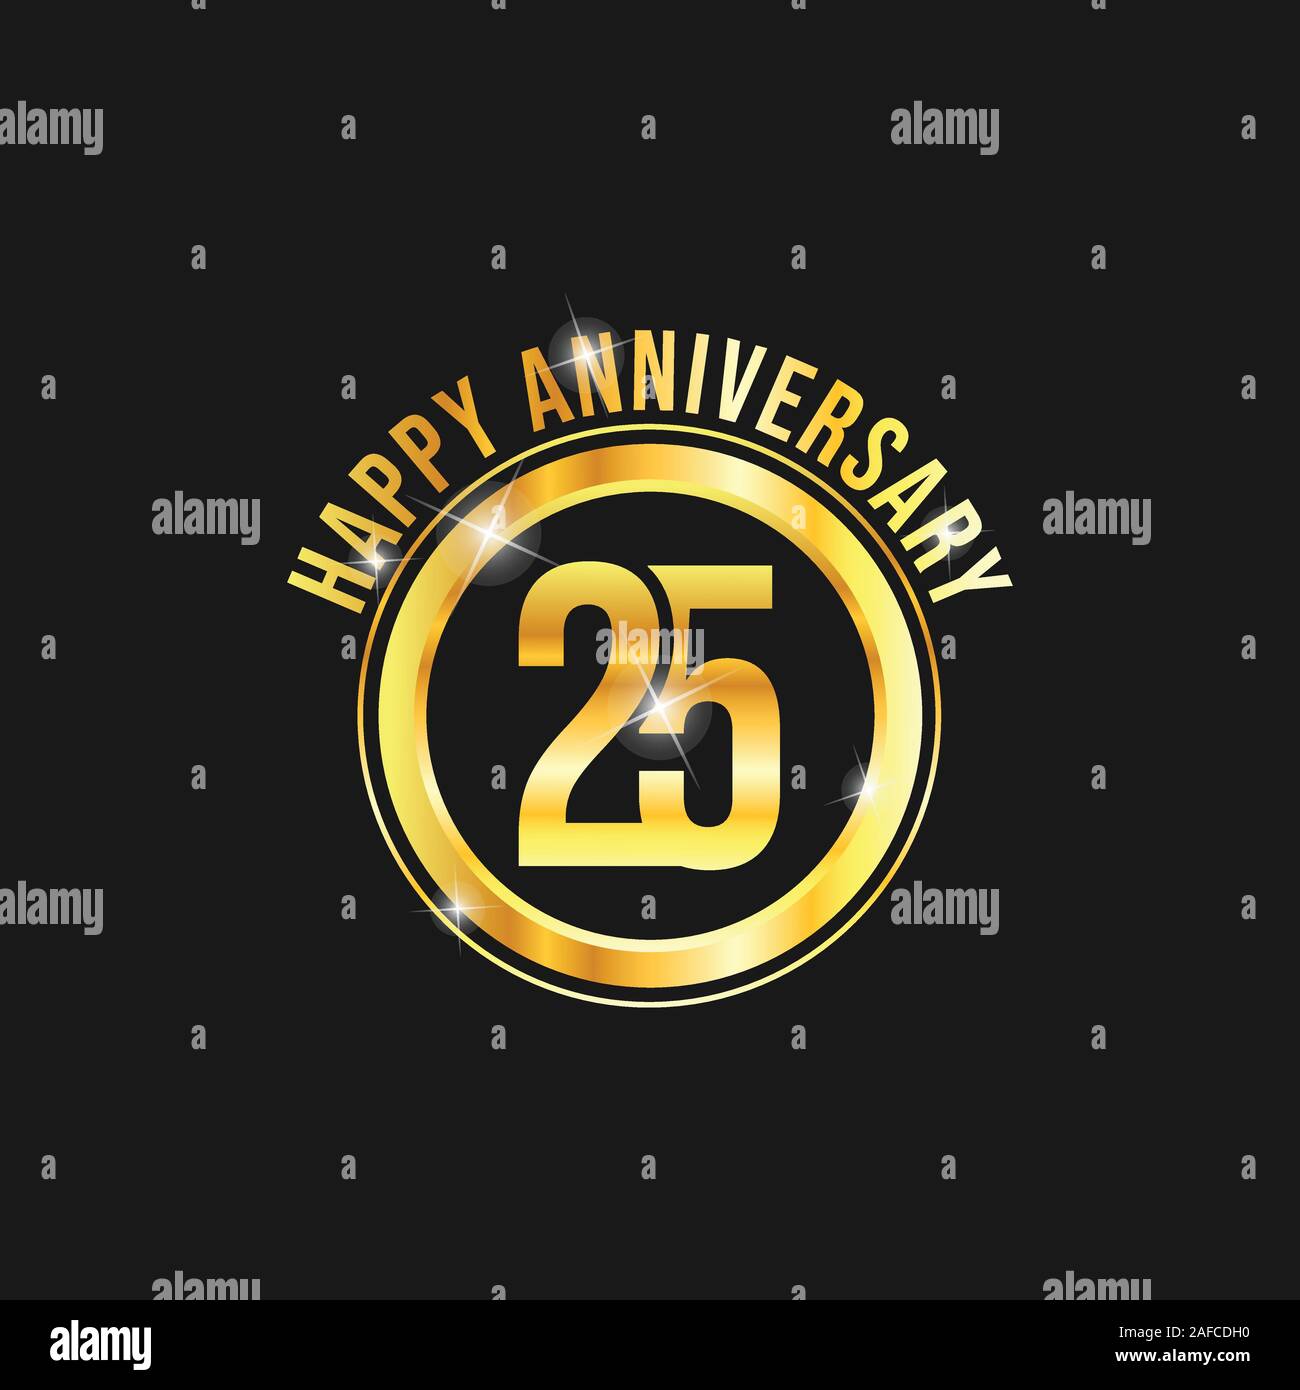 25 year anniversary gold label vector image. Golden anniversary label vector logo design Stock Vector